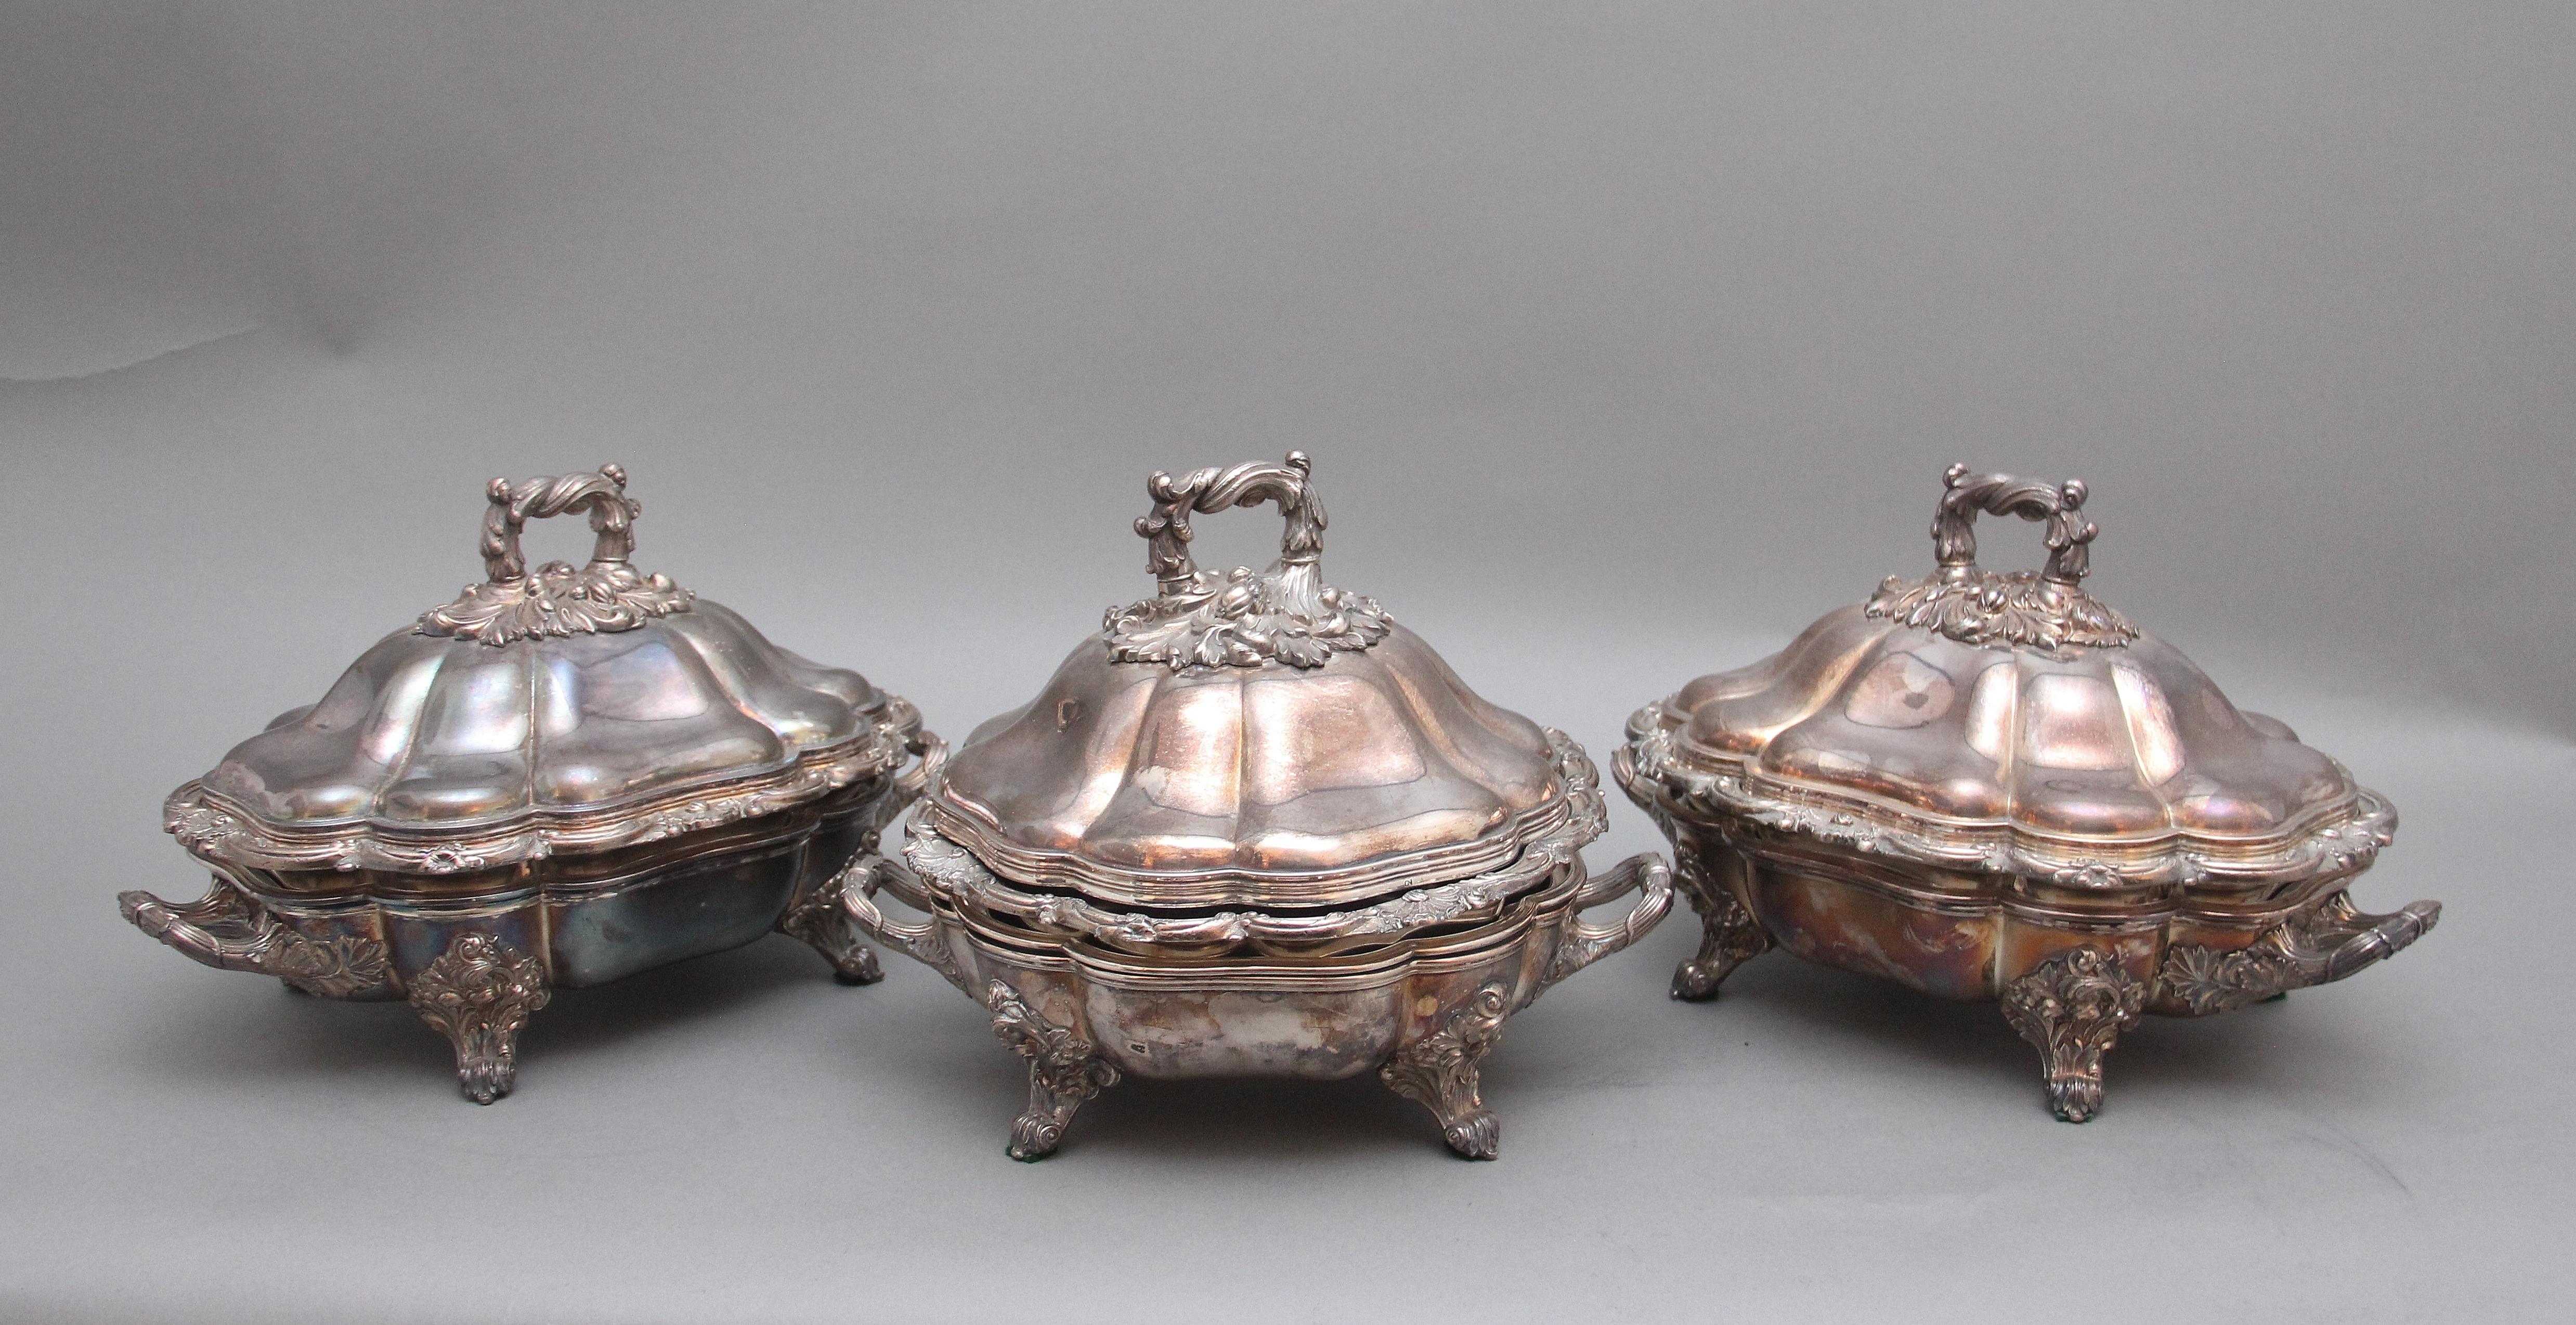 A set of three early 19th Century silver plated Old Sheffield tureens, all three having domed covered lids with highly decorative acanthus leaf handle, the same style handle is at each side of the dishes, supported on four intricate engraved feet,